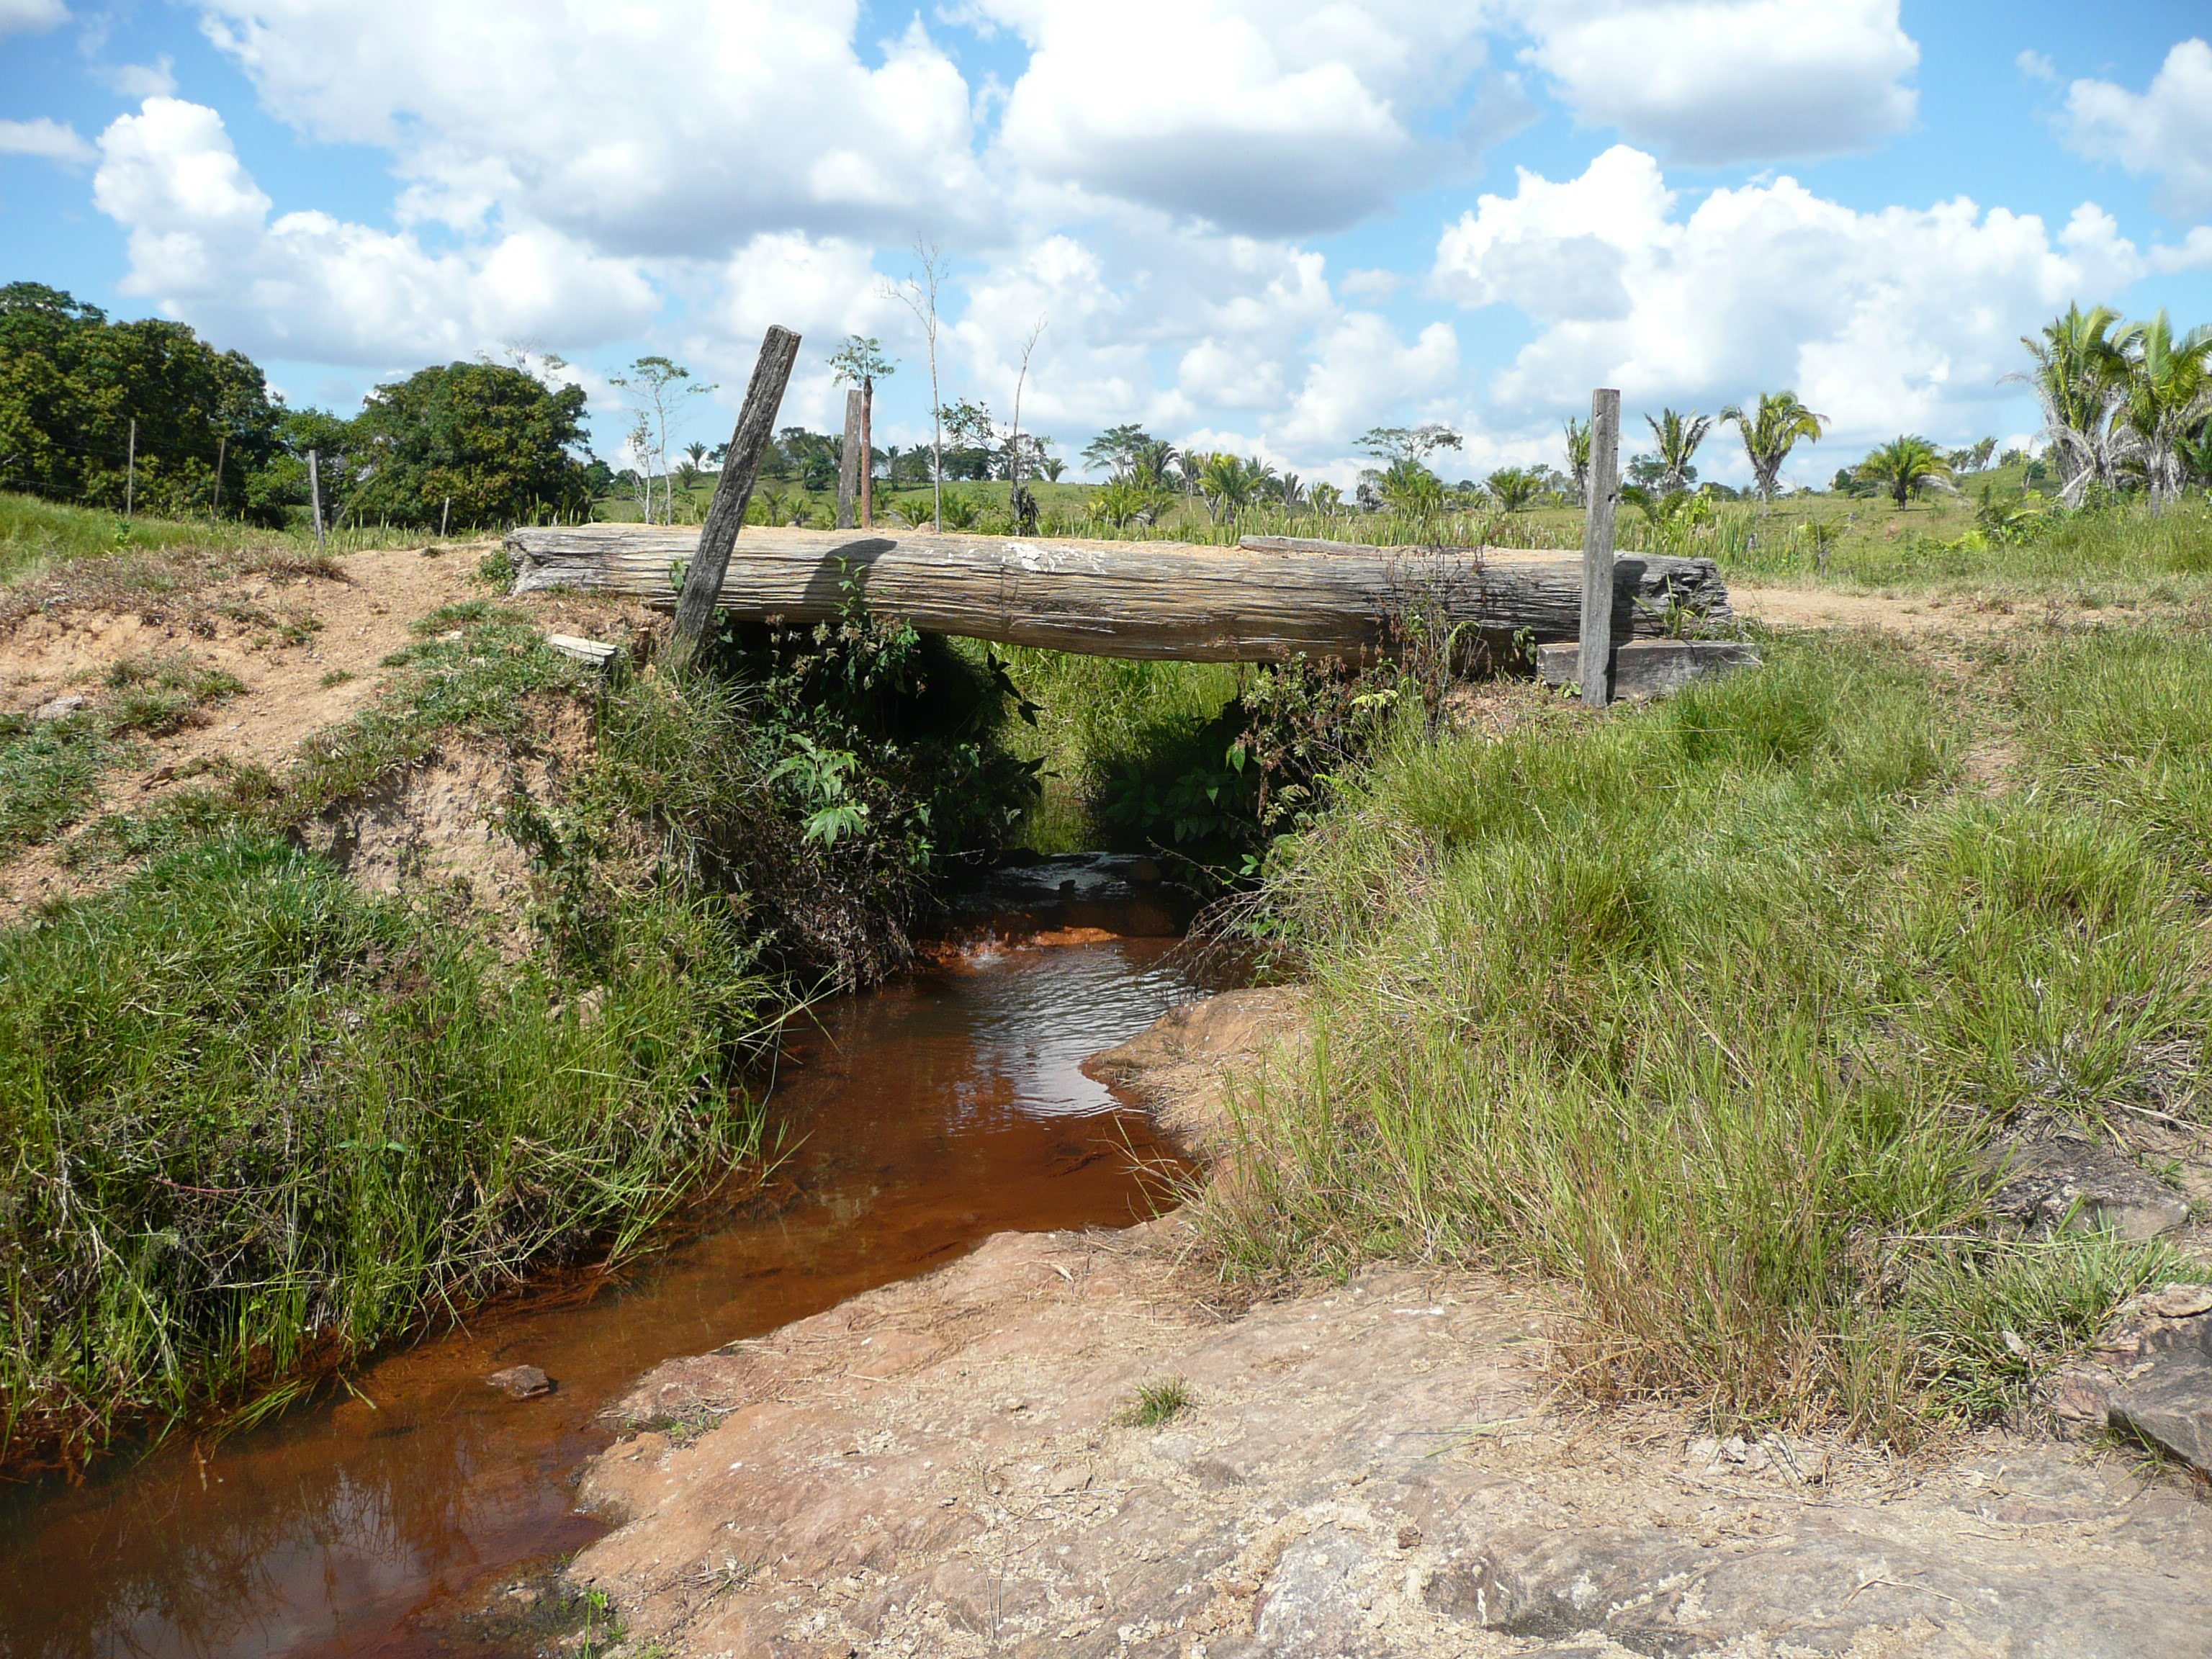 Picture by Katrina Mullan of pasture and creek in Brazil